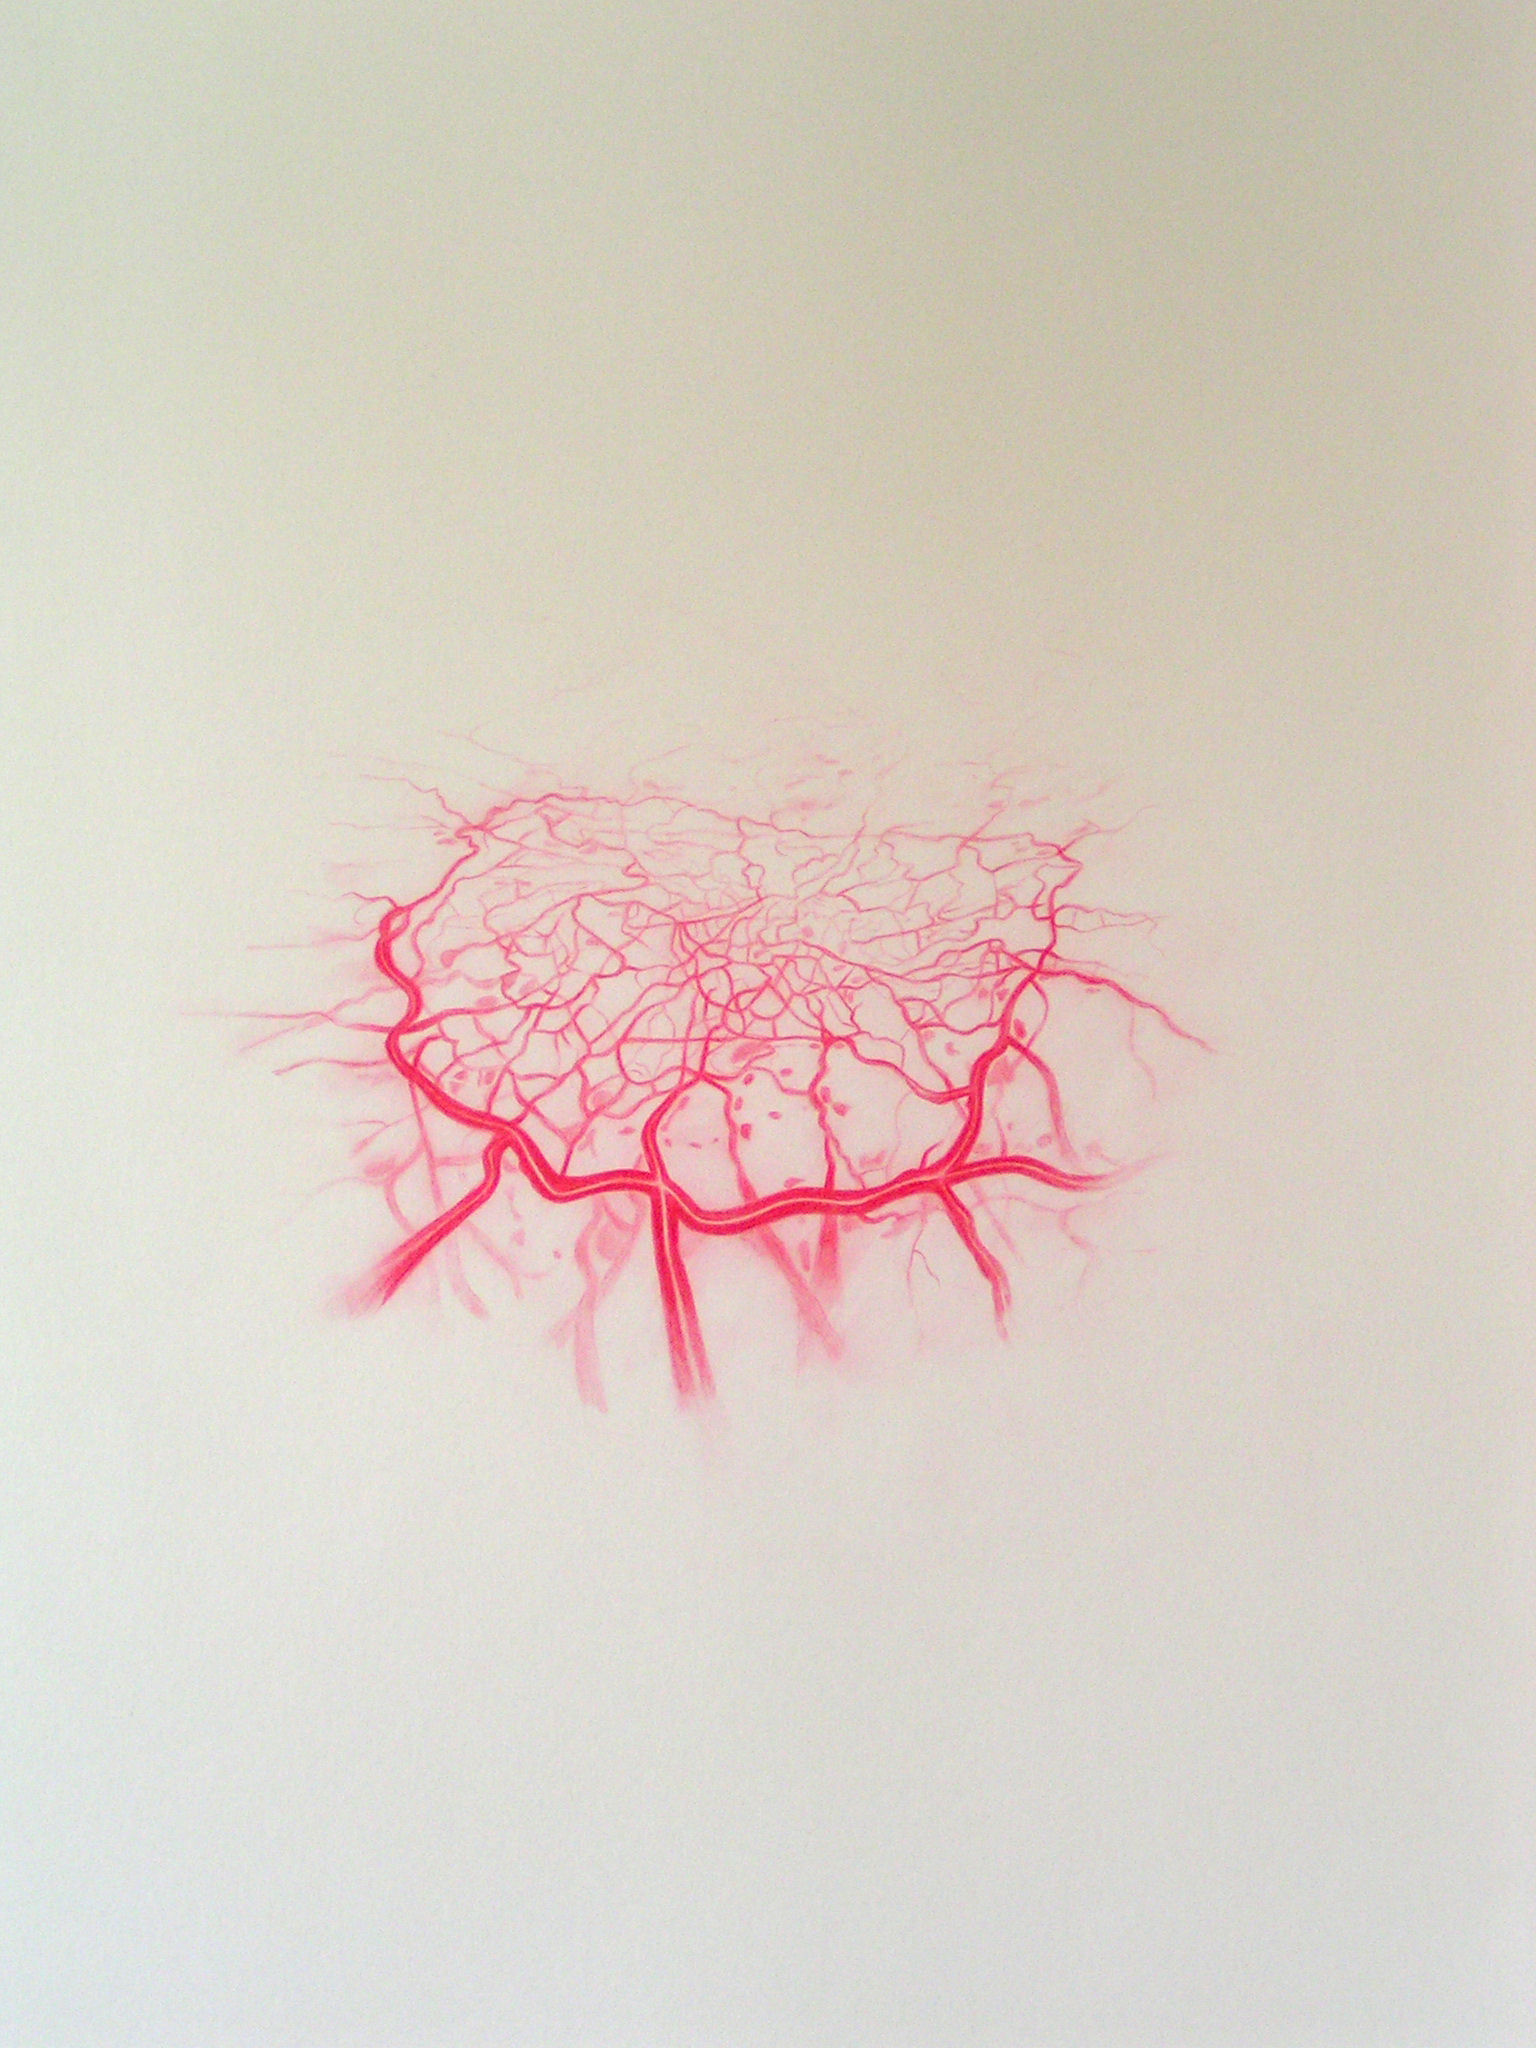 Emma J Williams 'Untitled Red Drawing No.9' 2008 pencil on paper